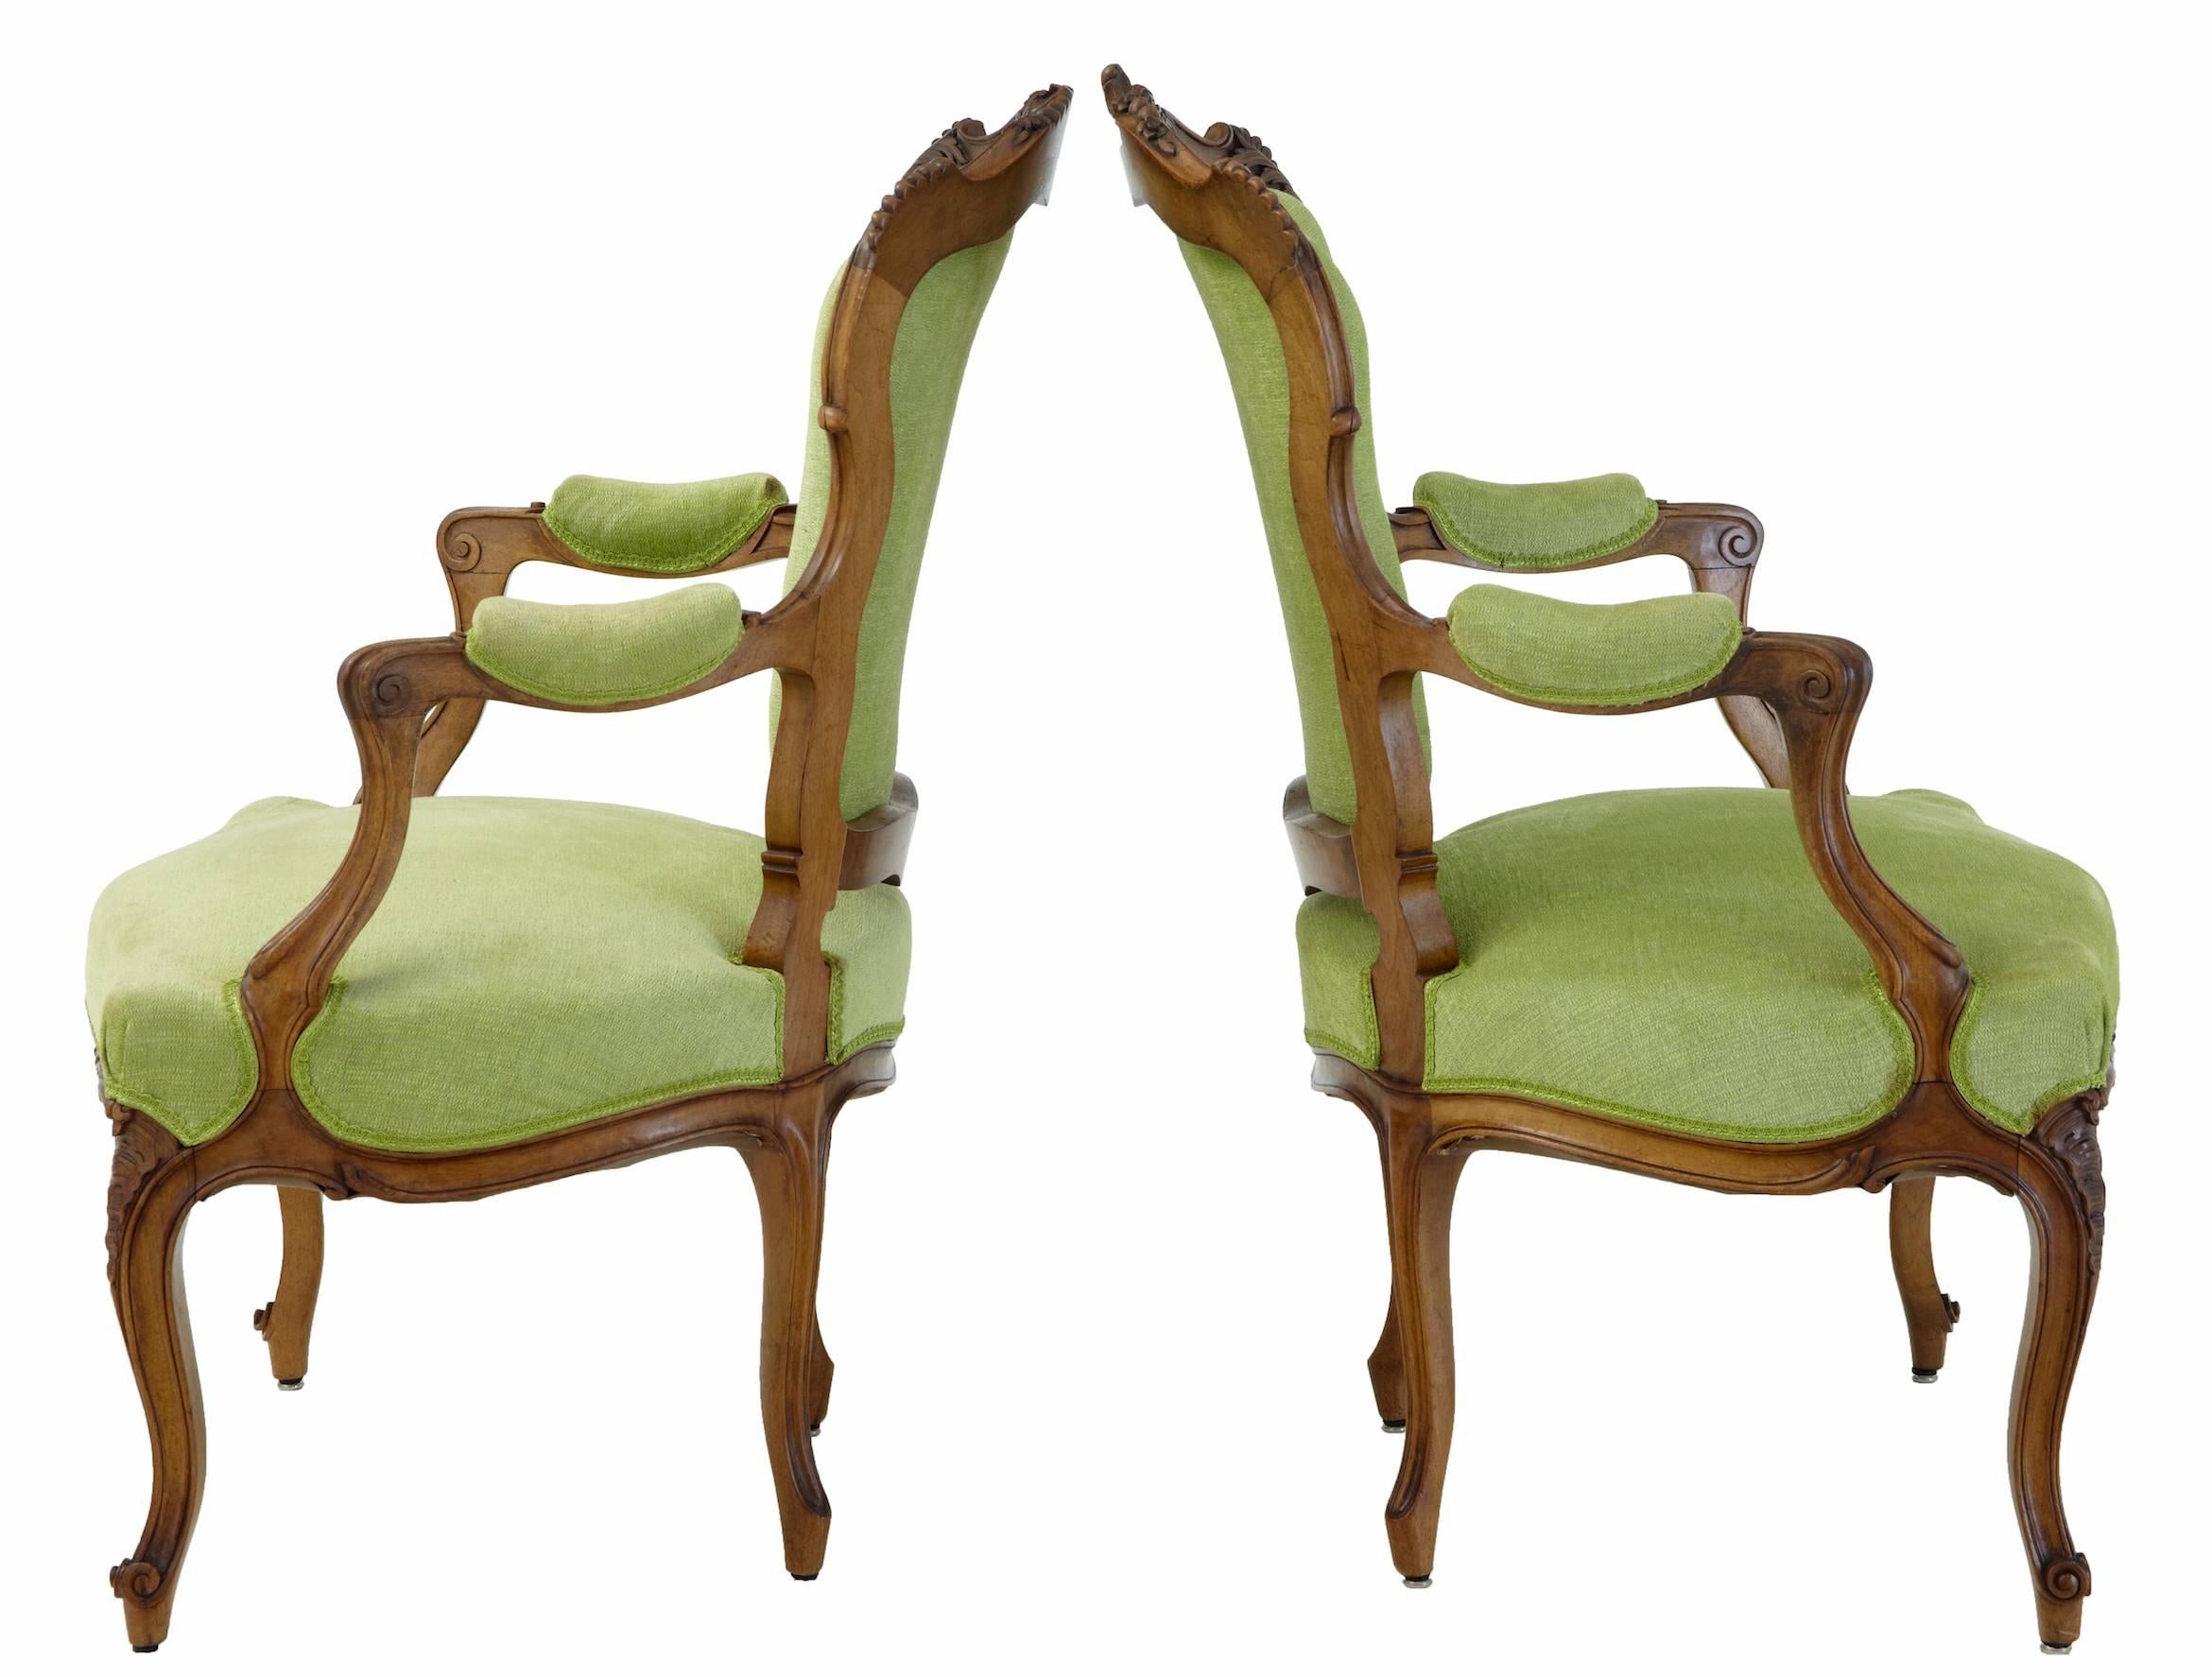 Fine pair of French armchairs, circa 1870.
Carved to the backrest, arm, legs and front frieze
Later covering which is in good order.
Minor losses to carving on feet, one carving loss to back rail (photographed)

Measures: Height 37 1/2